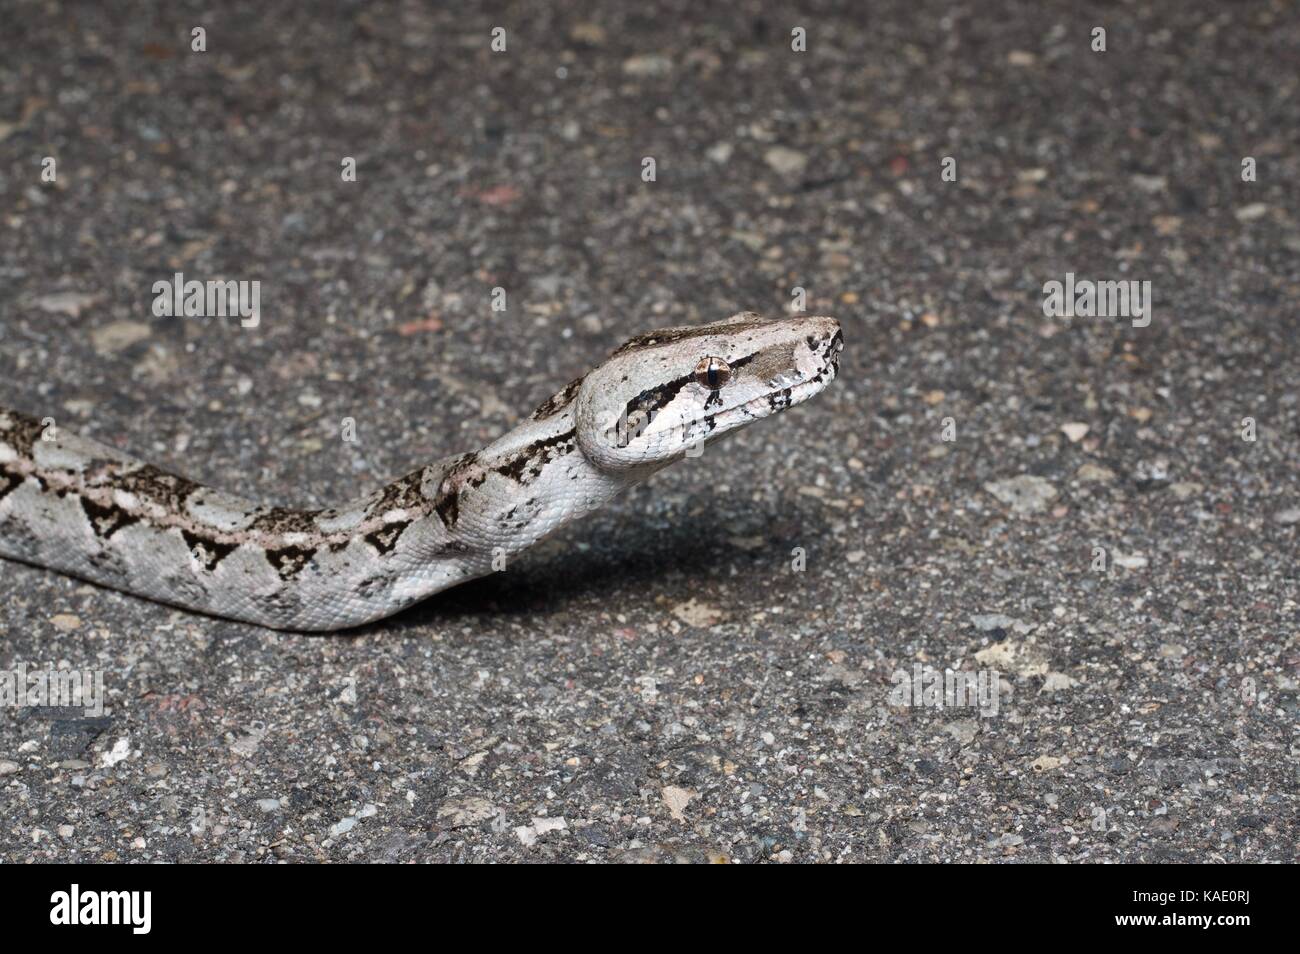 A Boa Constrictor (Boa imperator) on a paved road at night near Alamos, Sonora, Mexico Stock Photo